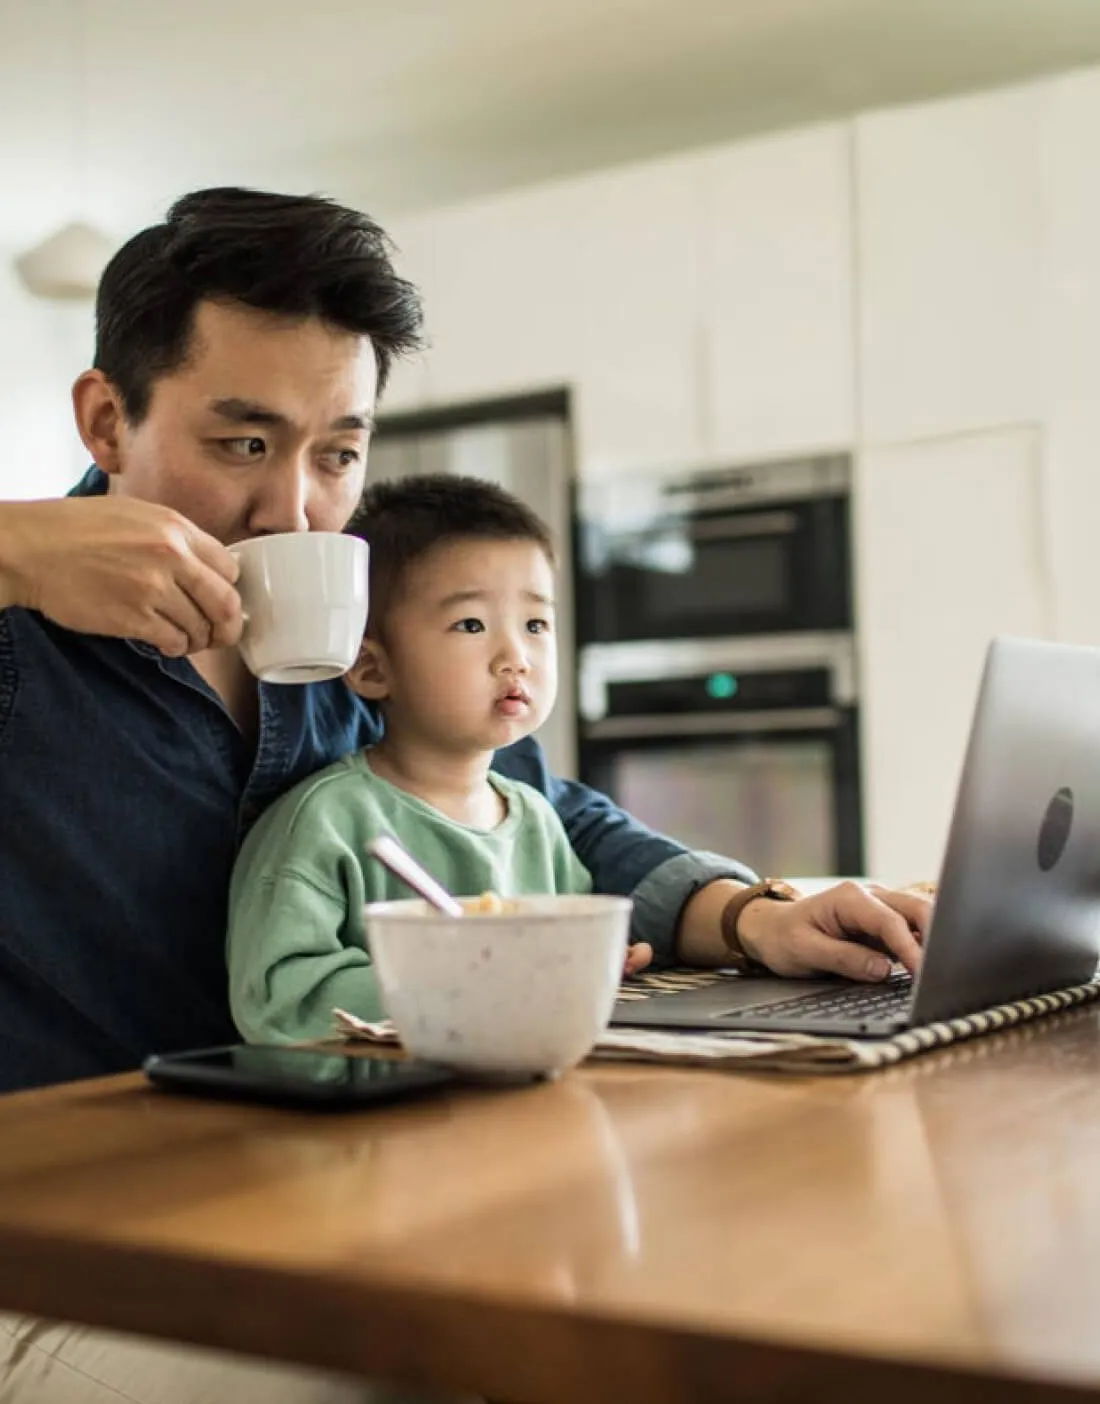 man of color sipping coffee while holding his son in his lap and working on a laptop